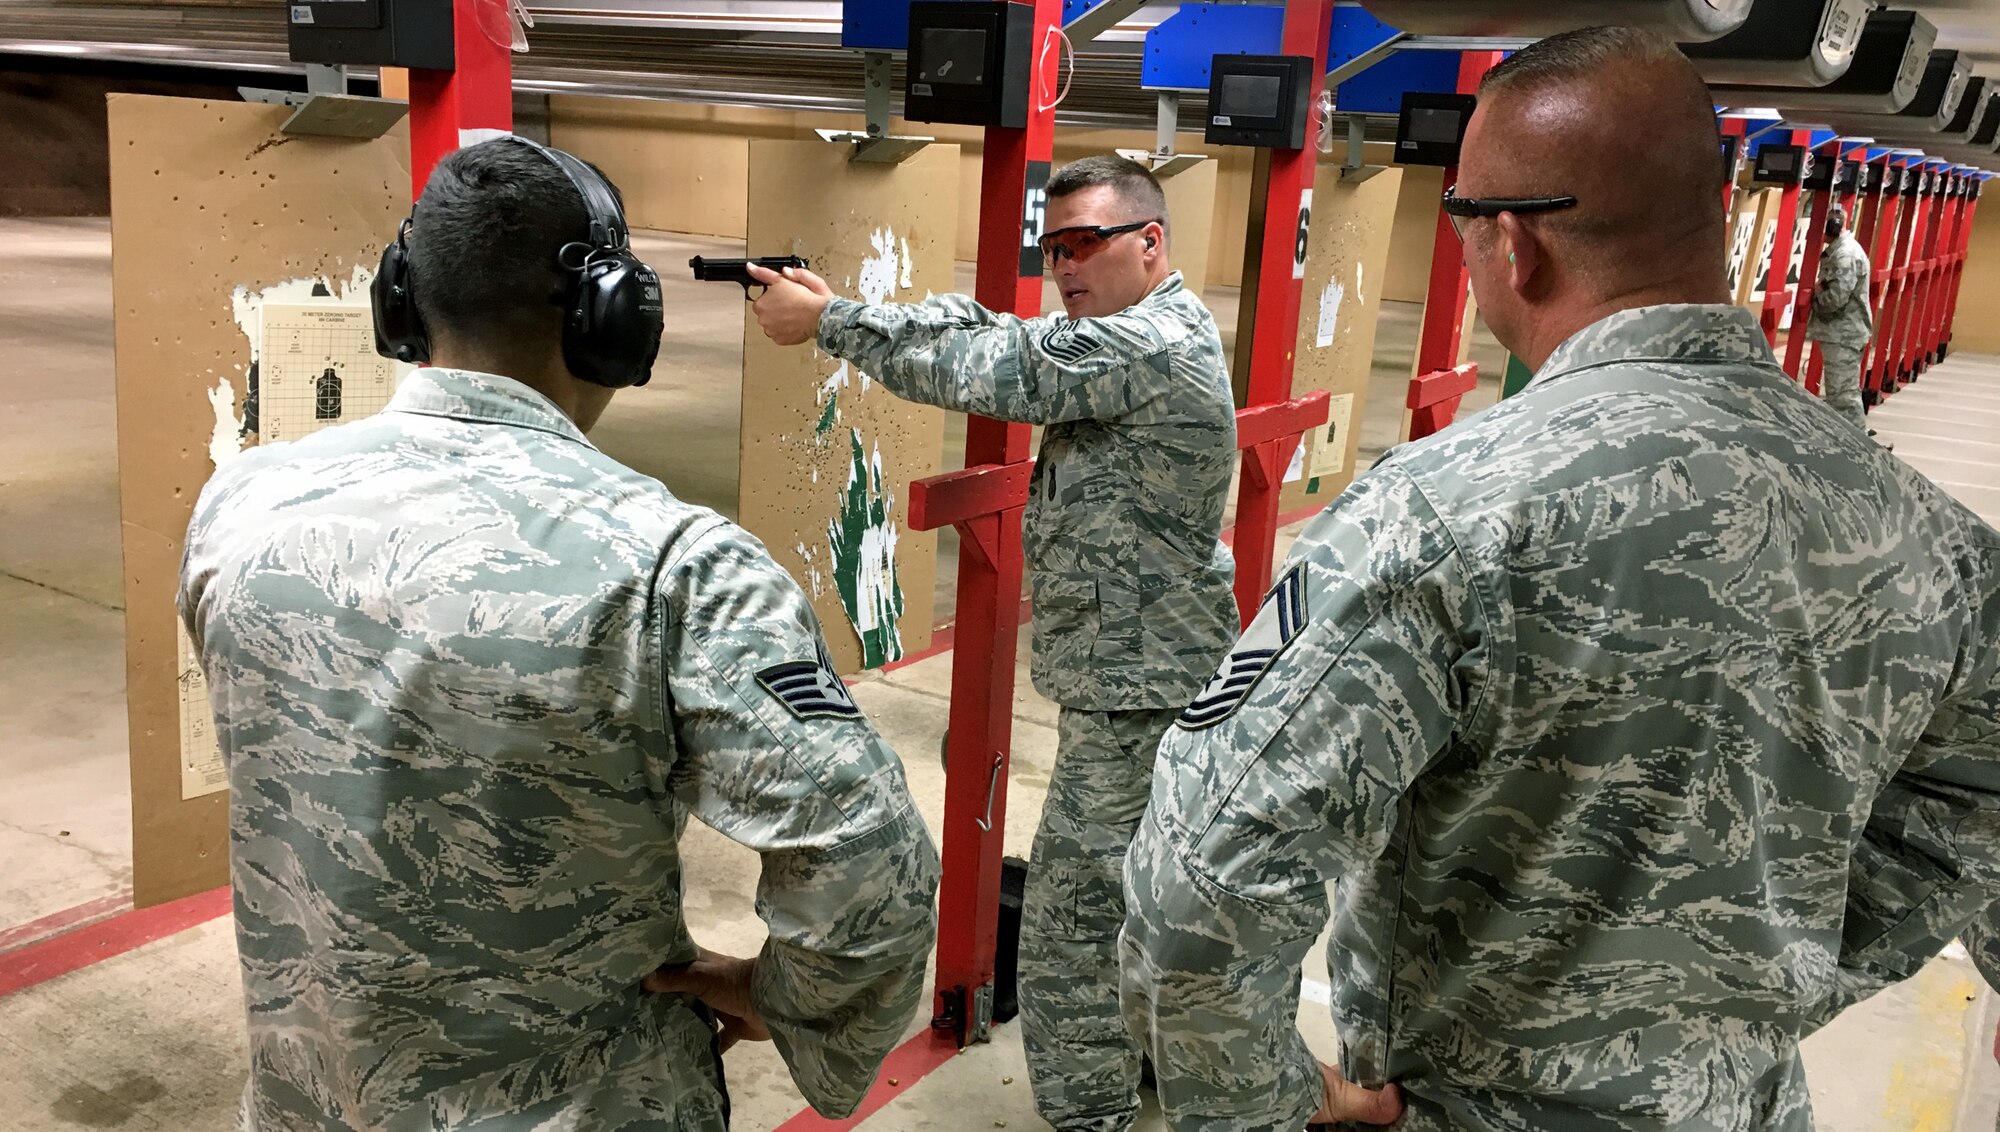 Tech. Sgt. Jared Jeppsen, 419th Security Forces Squadron, gives shooting tips to teammates set to compete in the International Bavarian Military Competition in Germany this week.